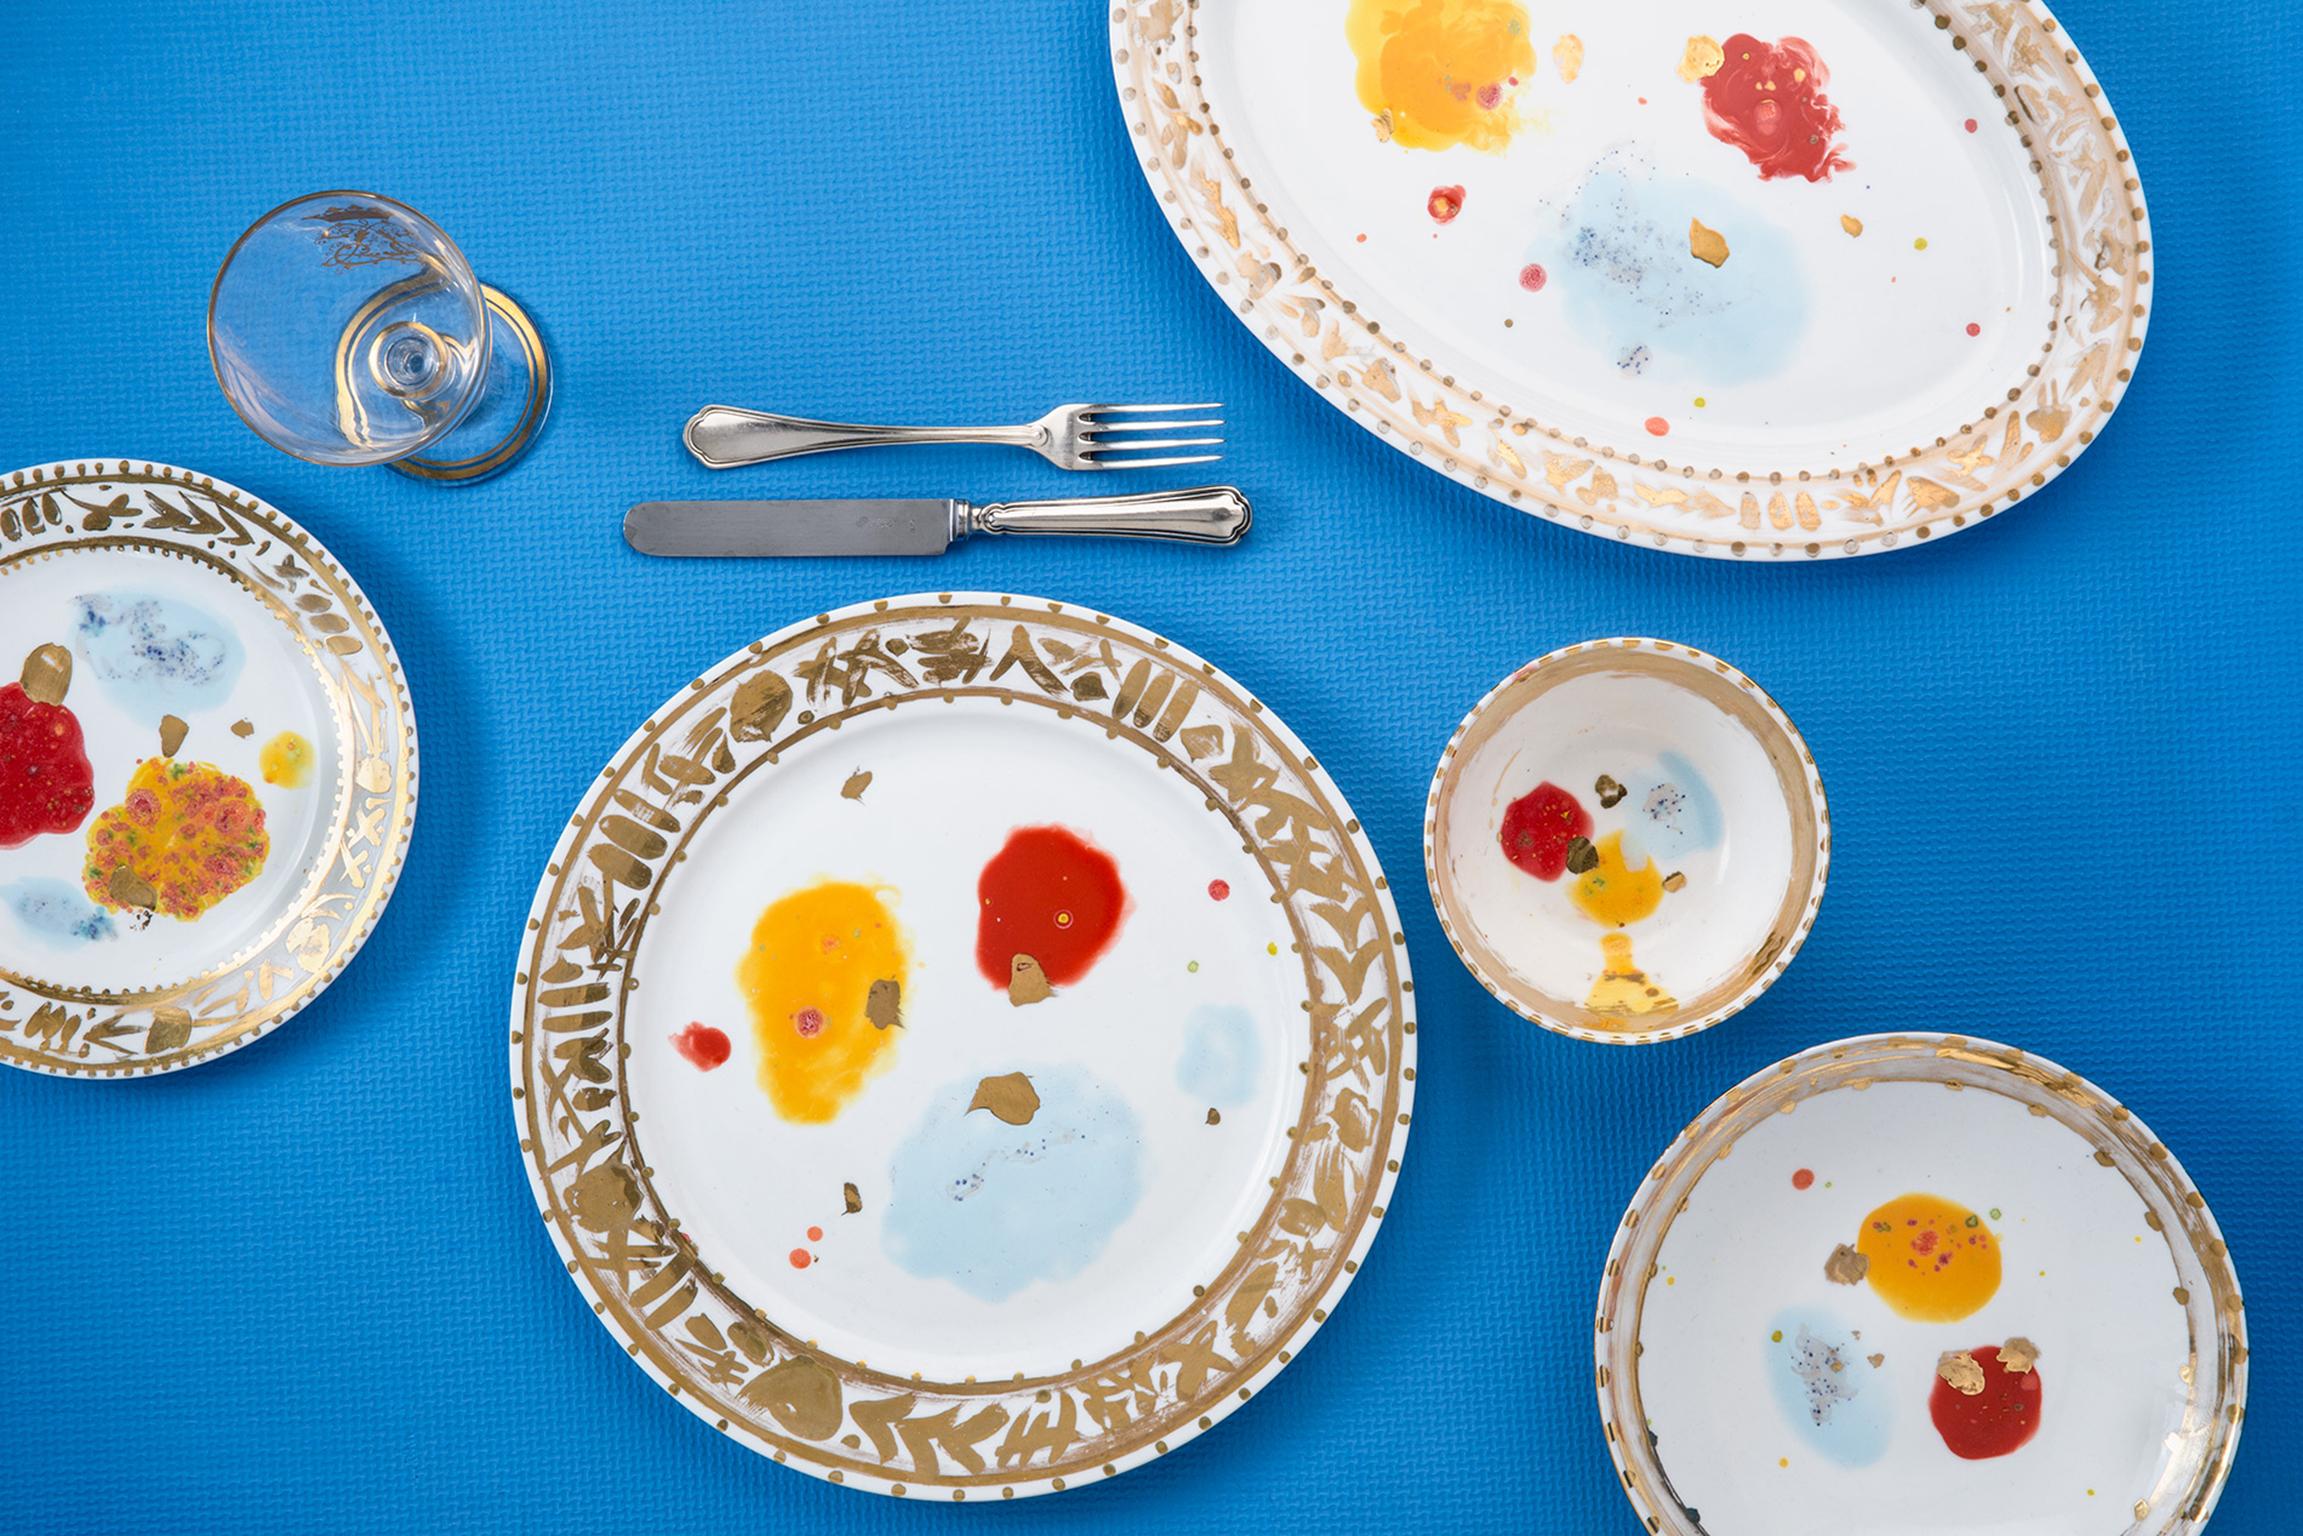 Handcrafted in Italy from the finest porcelain, this Caravaggio Dessert Plate underlines tradition thanks to its expressive decoration of big red, yellow and light-blue splotches, where passions are contained in a gold rim with classic